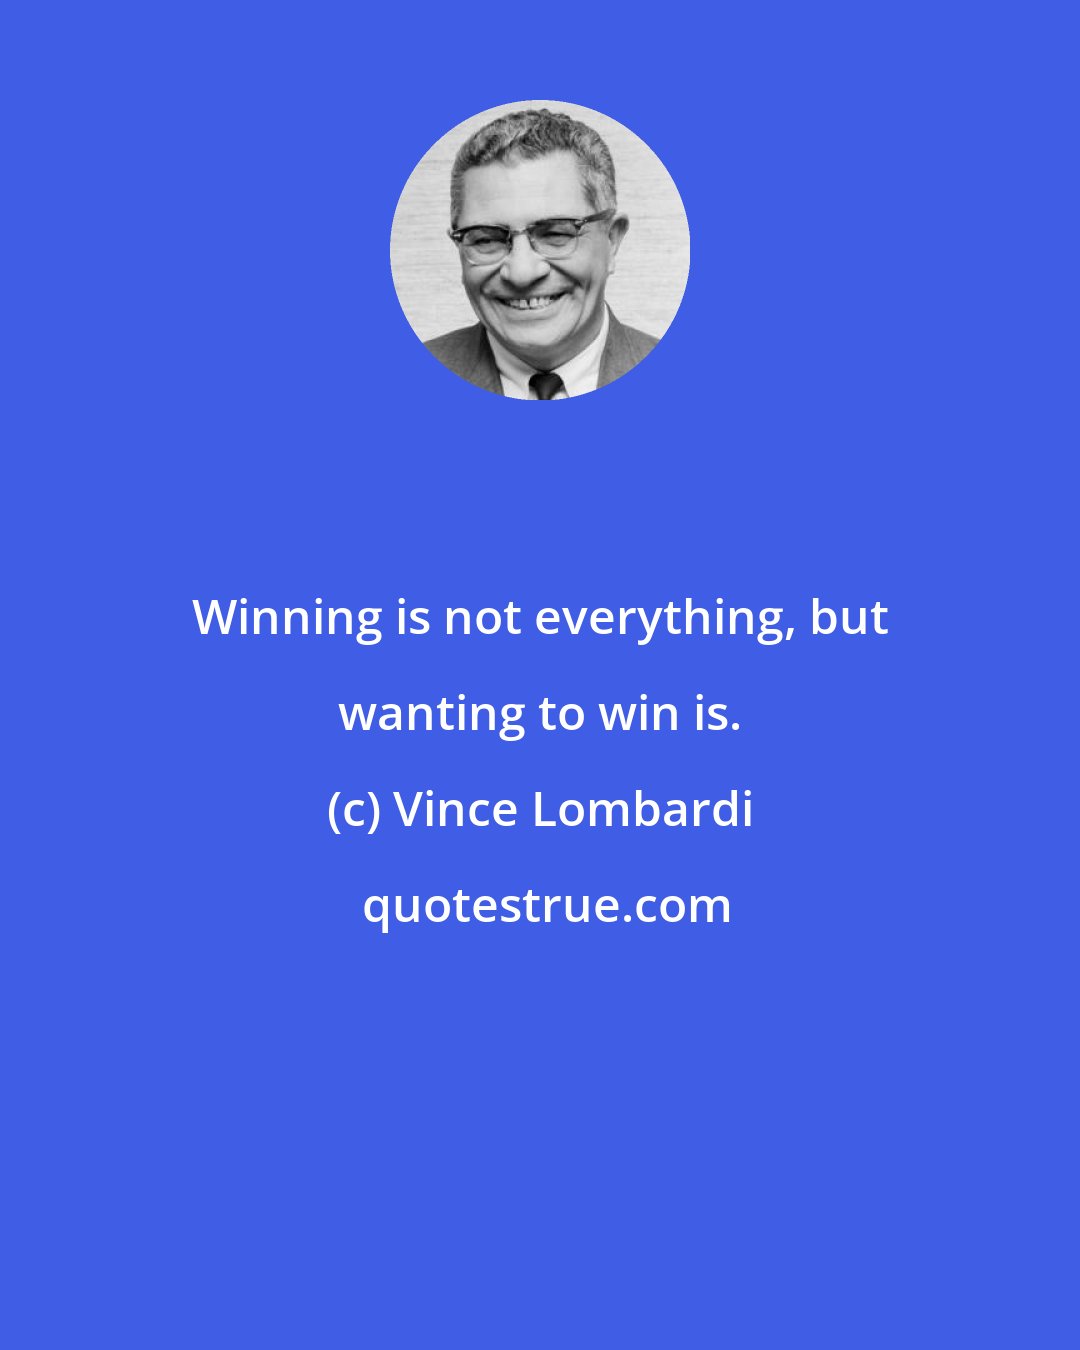 Vince Lombardi: Winning is not everything, but wanting to win is.